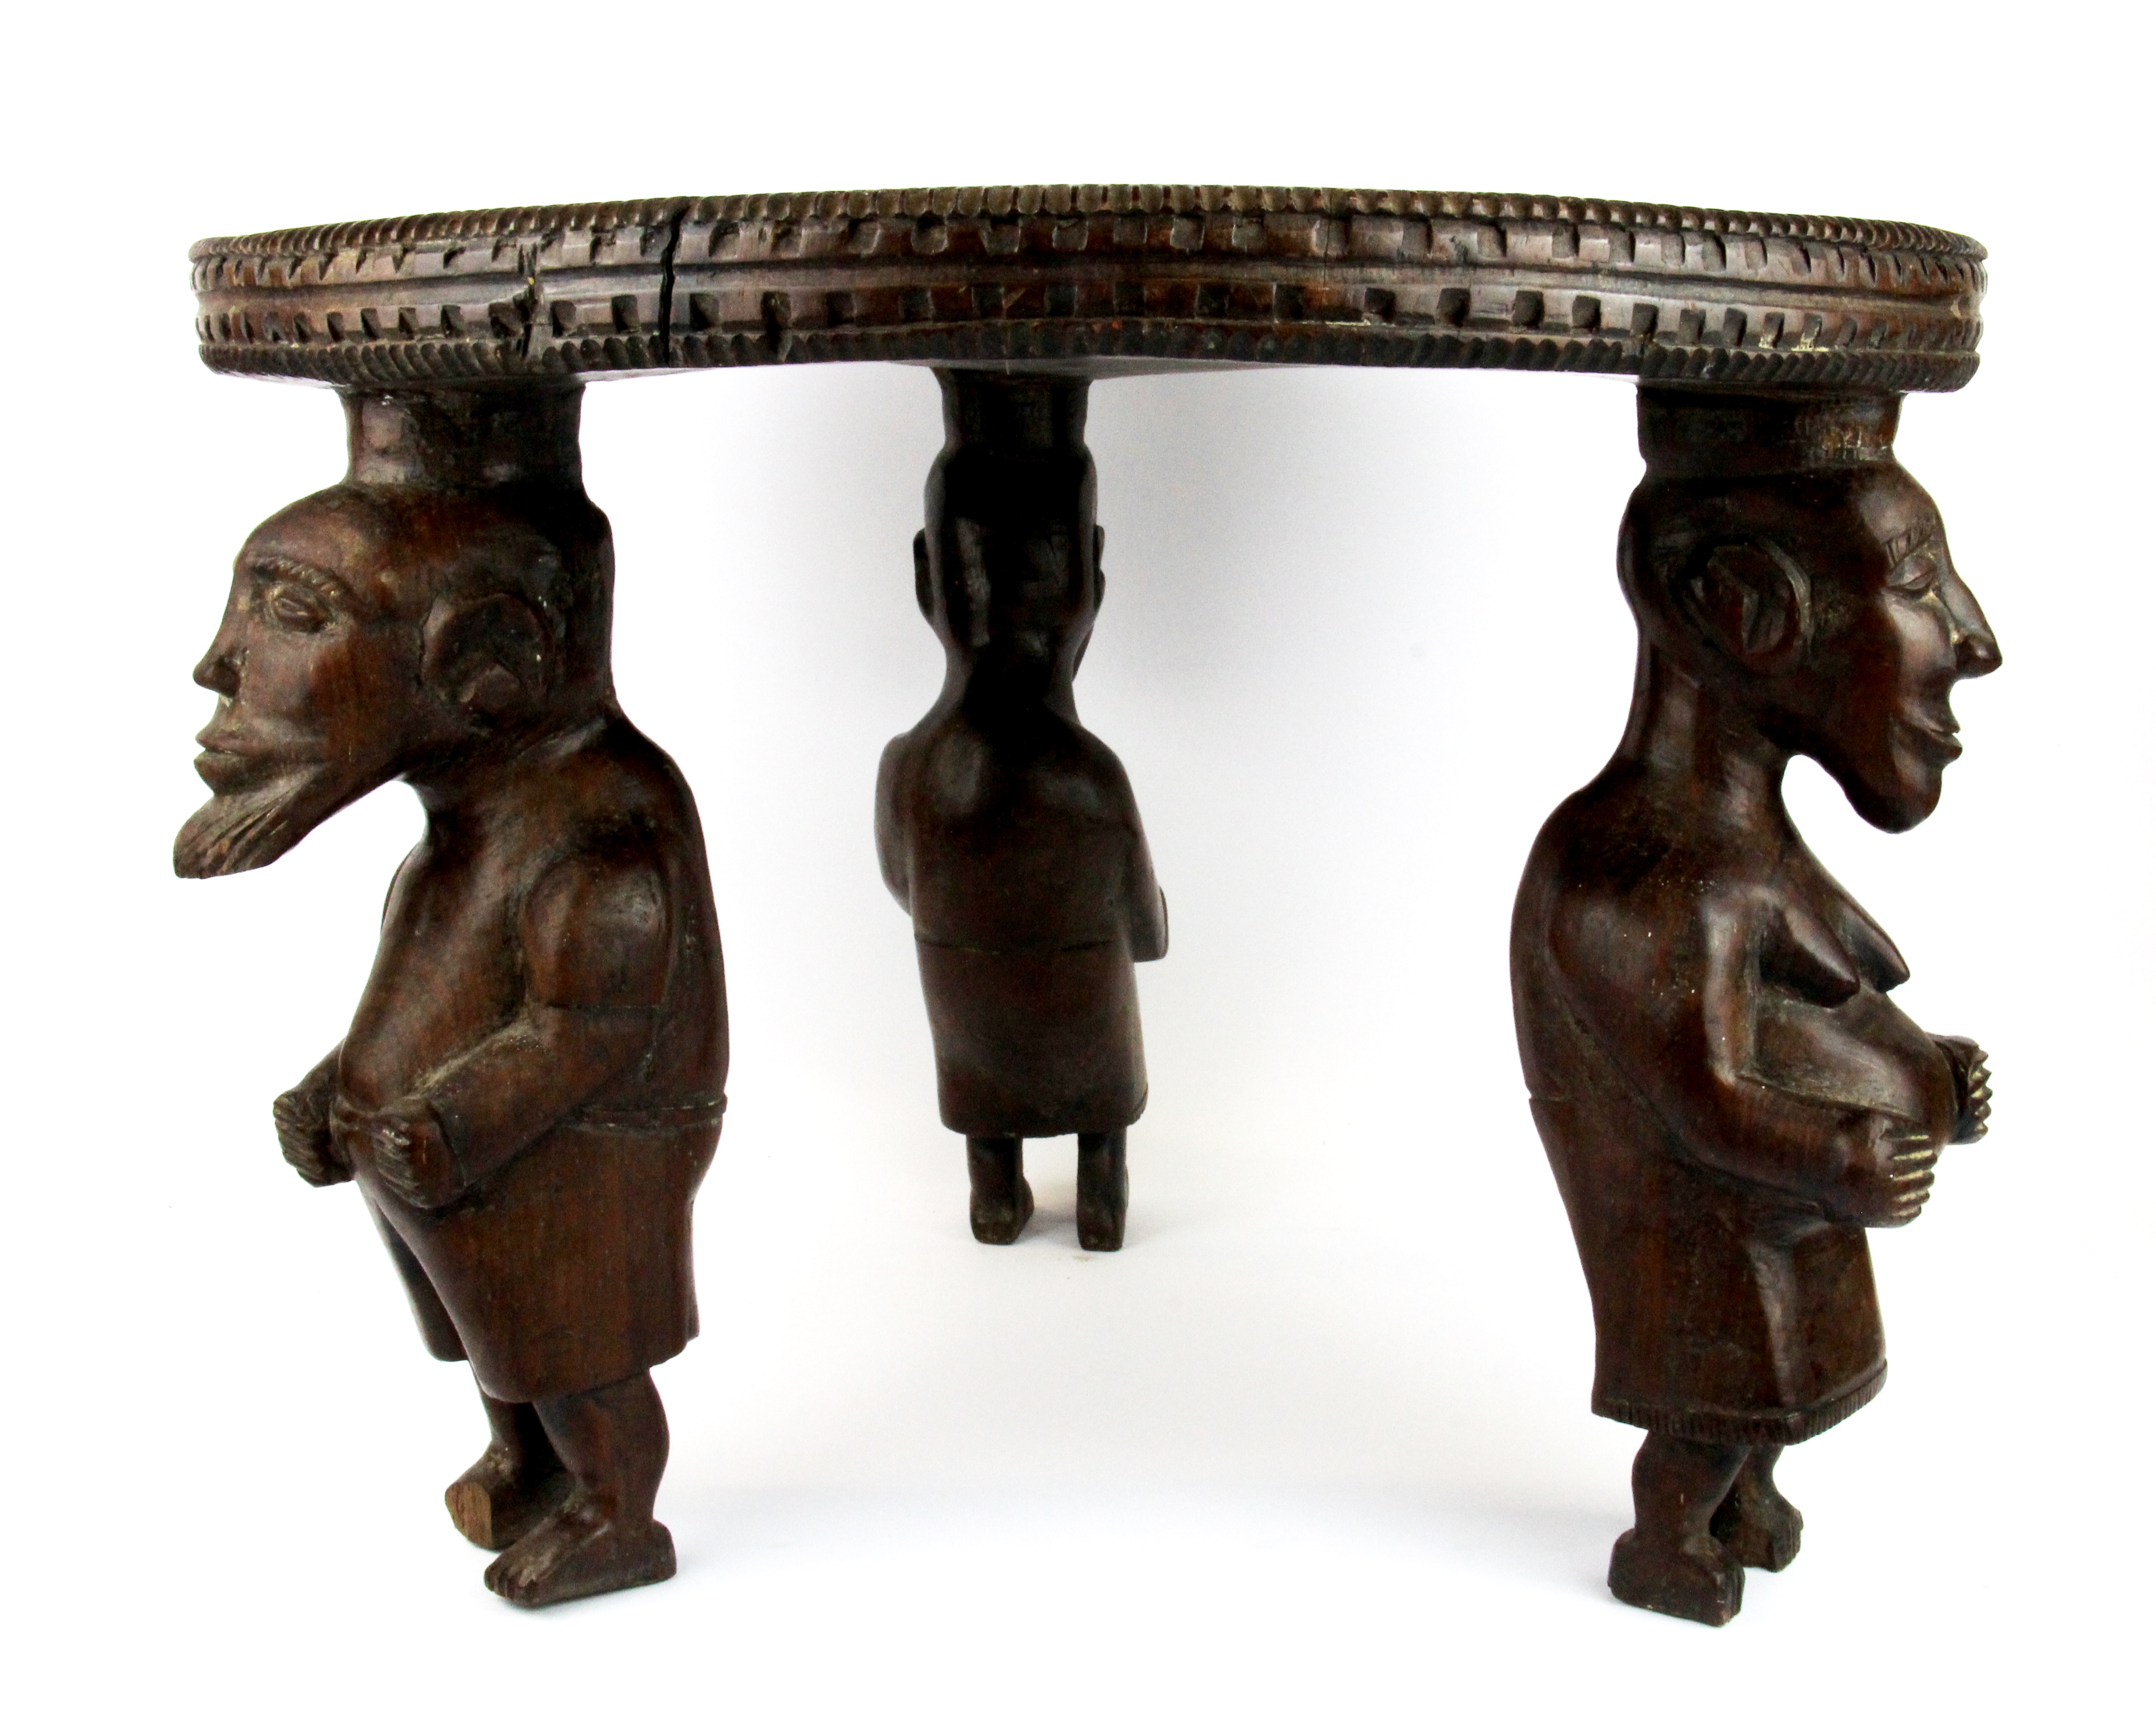 A rare African carved tribal hardwood table/stool with figural legs carved from a single piece of